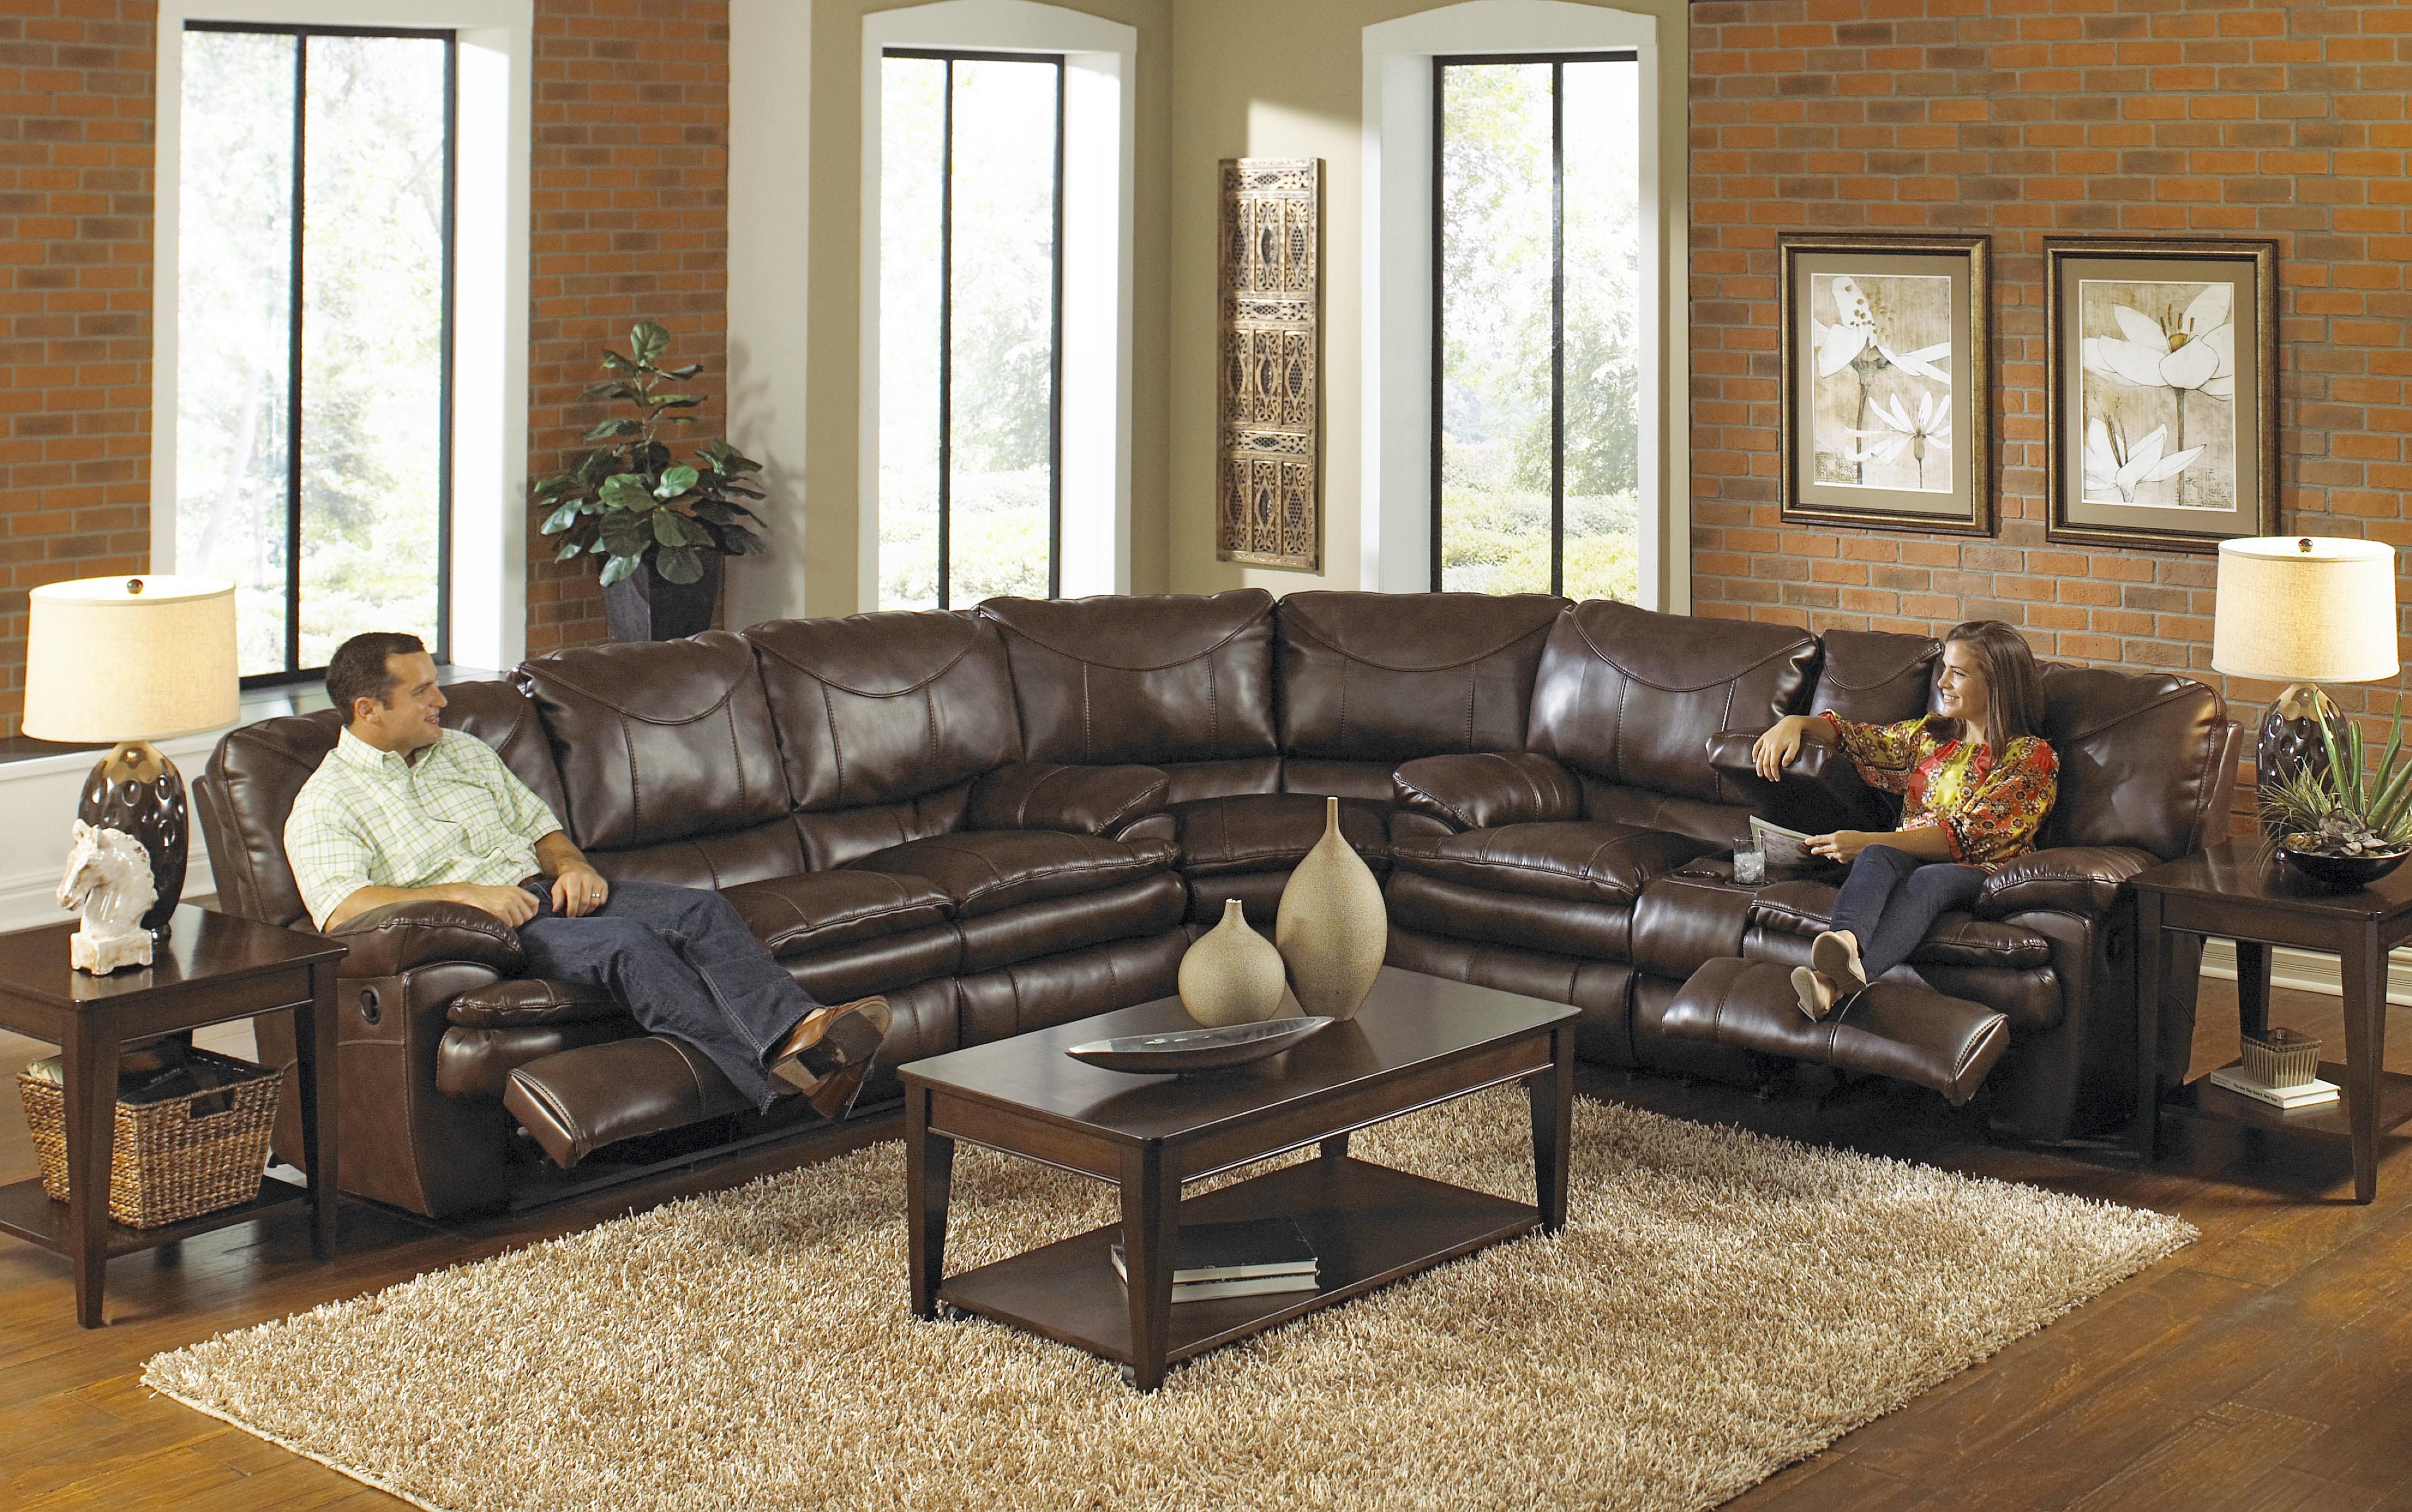 Buy large sectional reclining sectional sofas oversized sectional couch